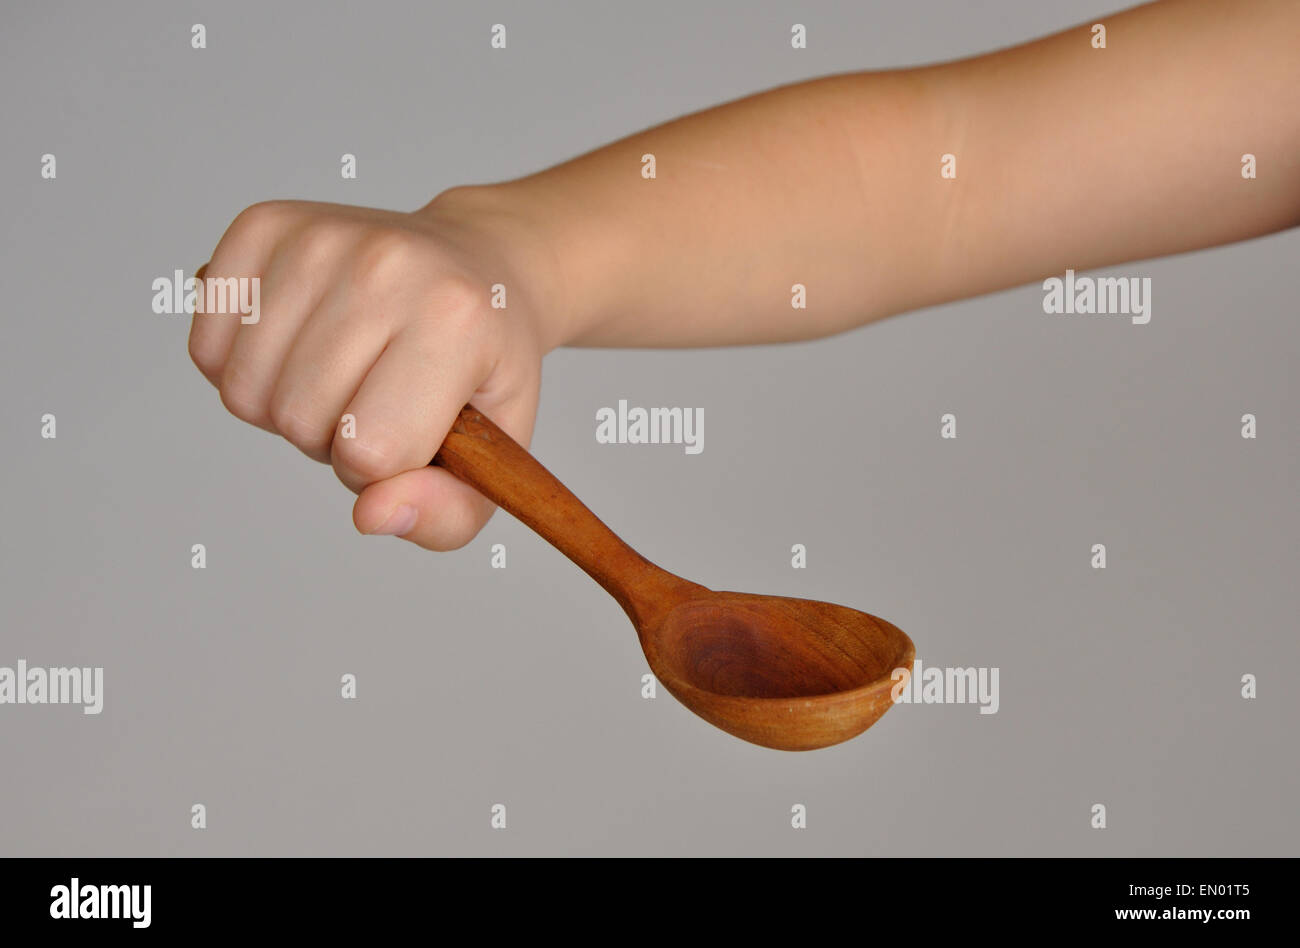 Wooden spoon in baby hand over gray background Stock Photo